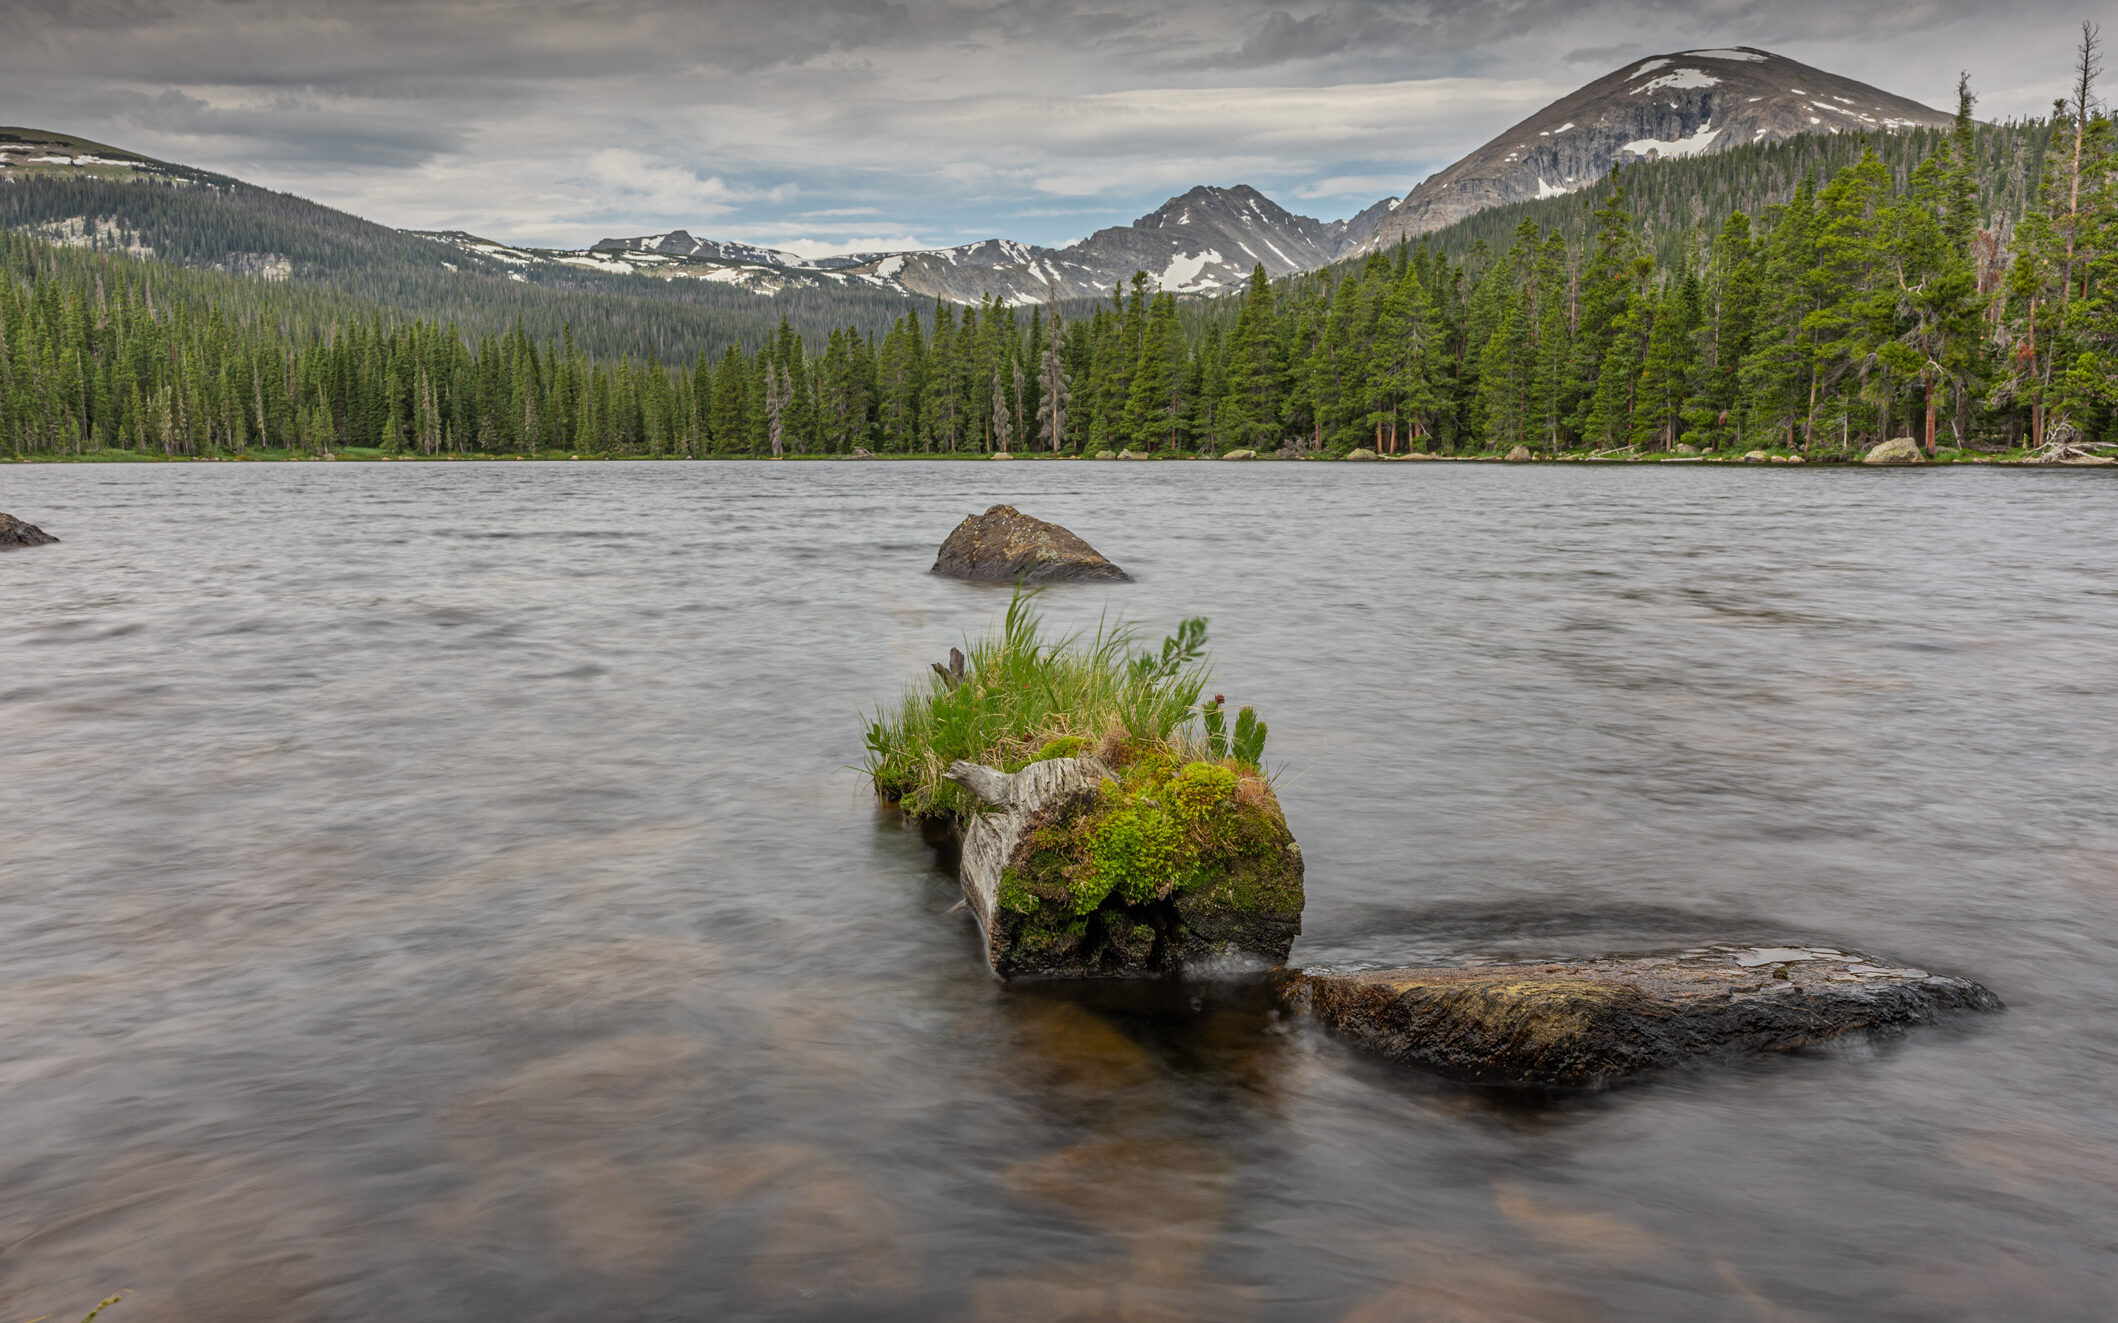 Finch lake in the summer. Small log and rock focused on in lake, forest and mountains below a cloudy sky in the background.